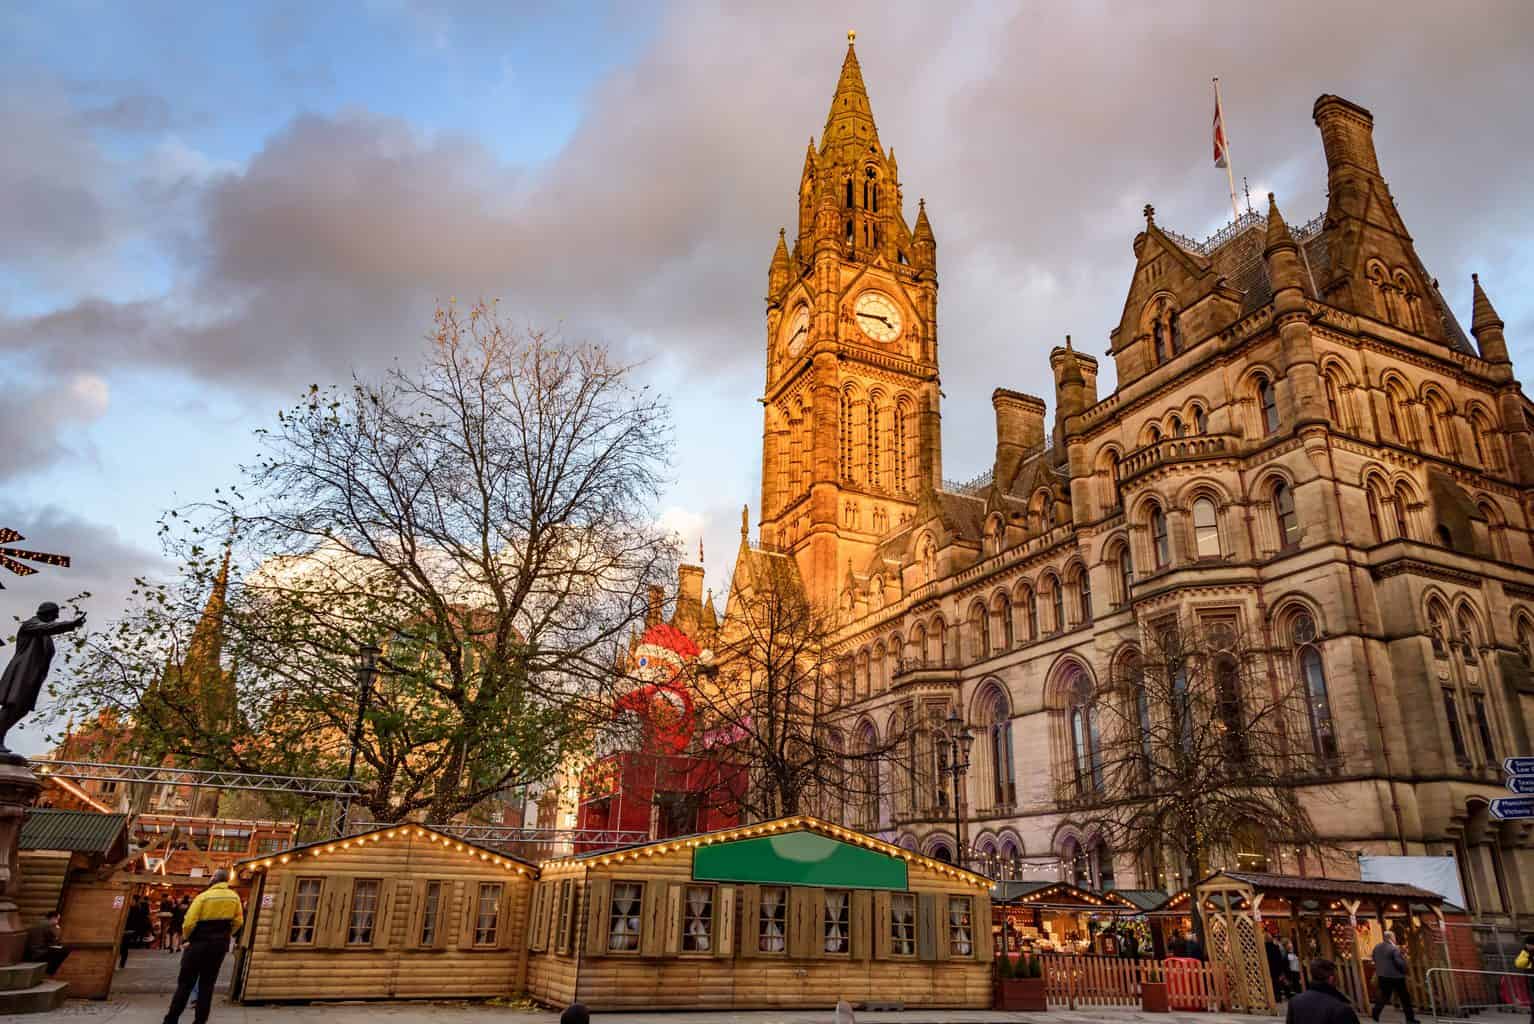 Manchester town hall and the vibrant Christmas market at Albert Square in Manchester, England.